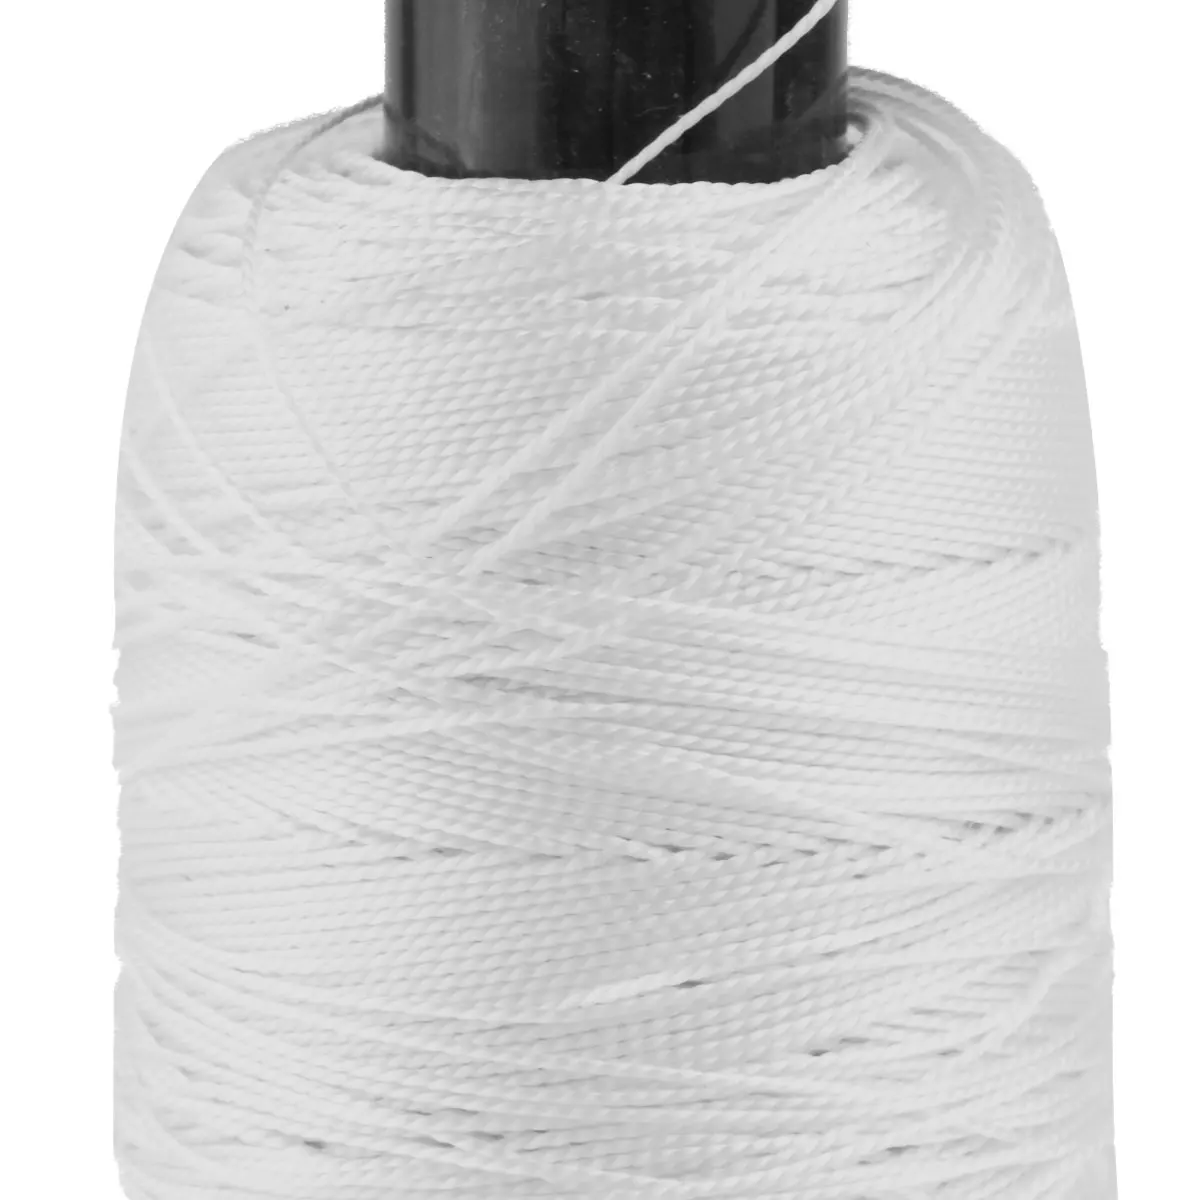 Details about   New 350M/260M Nylon Twine Line Multi-functional String for Kite Bowstring String 